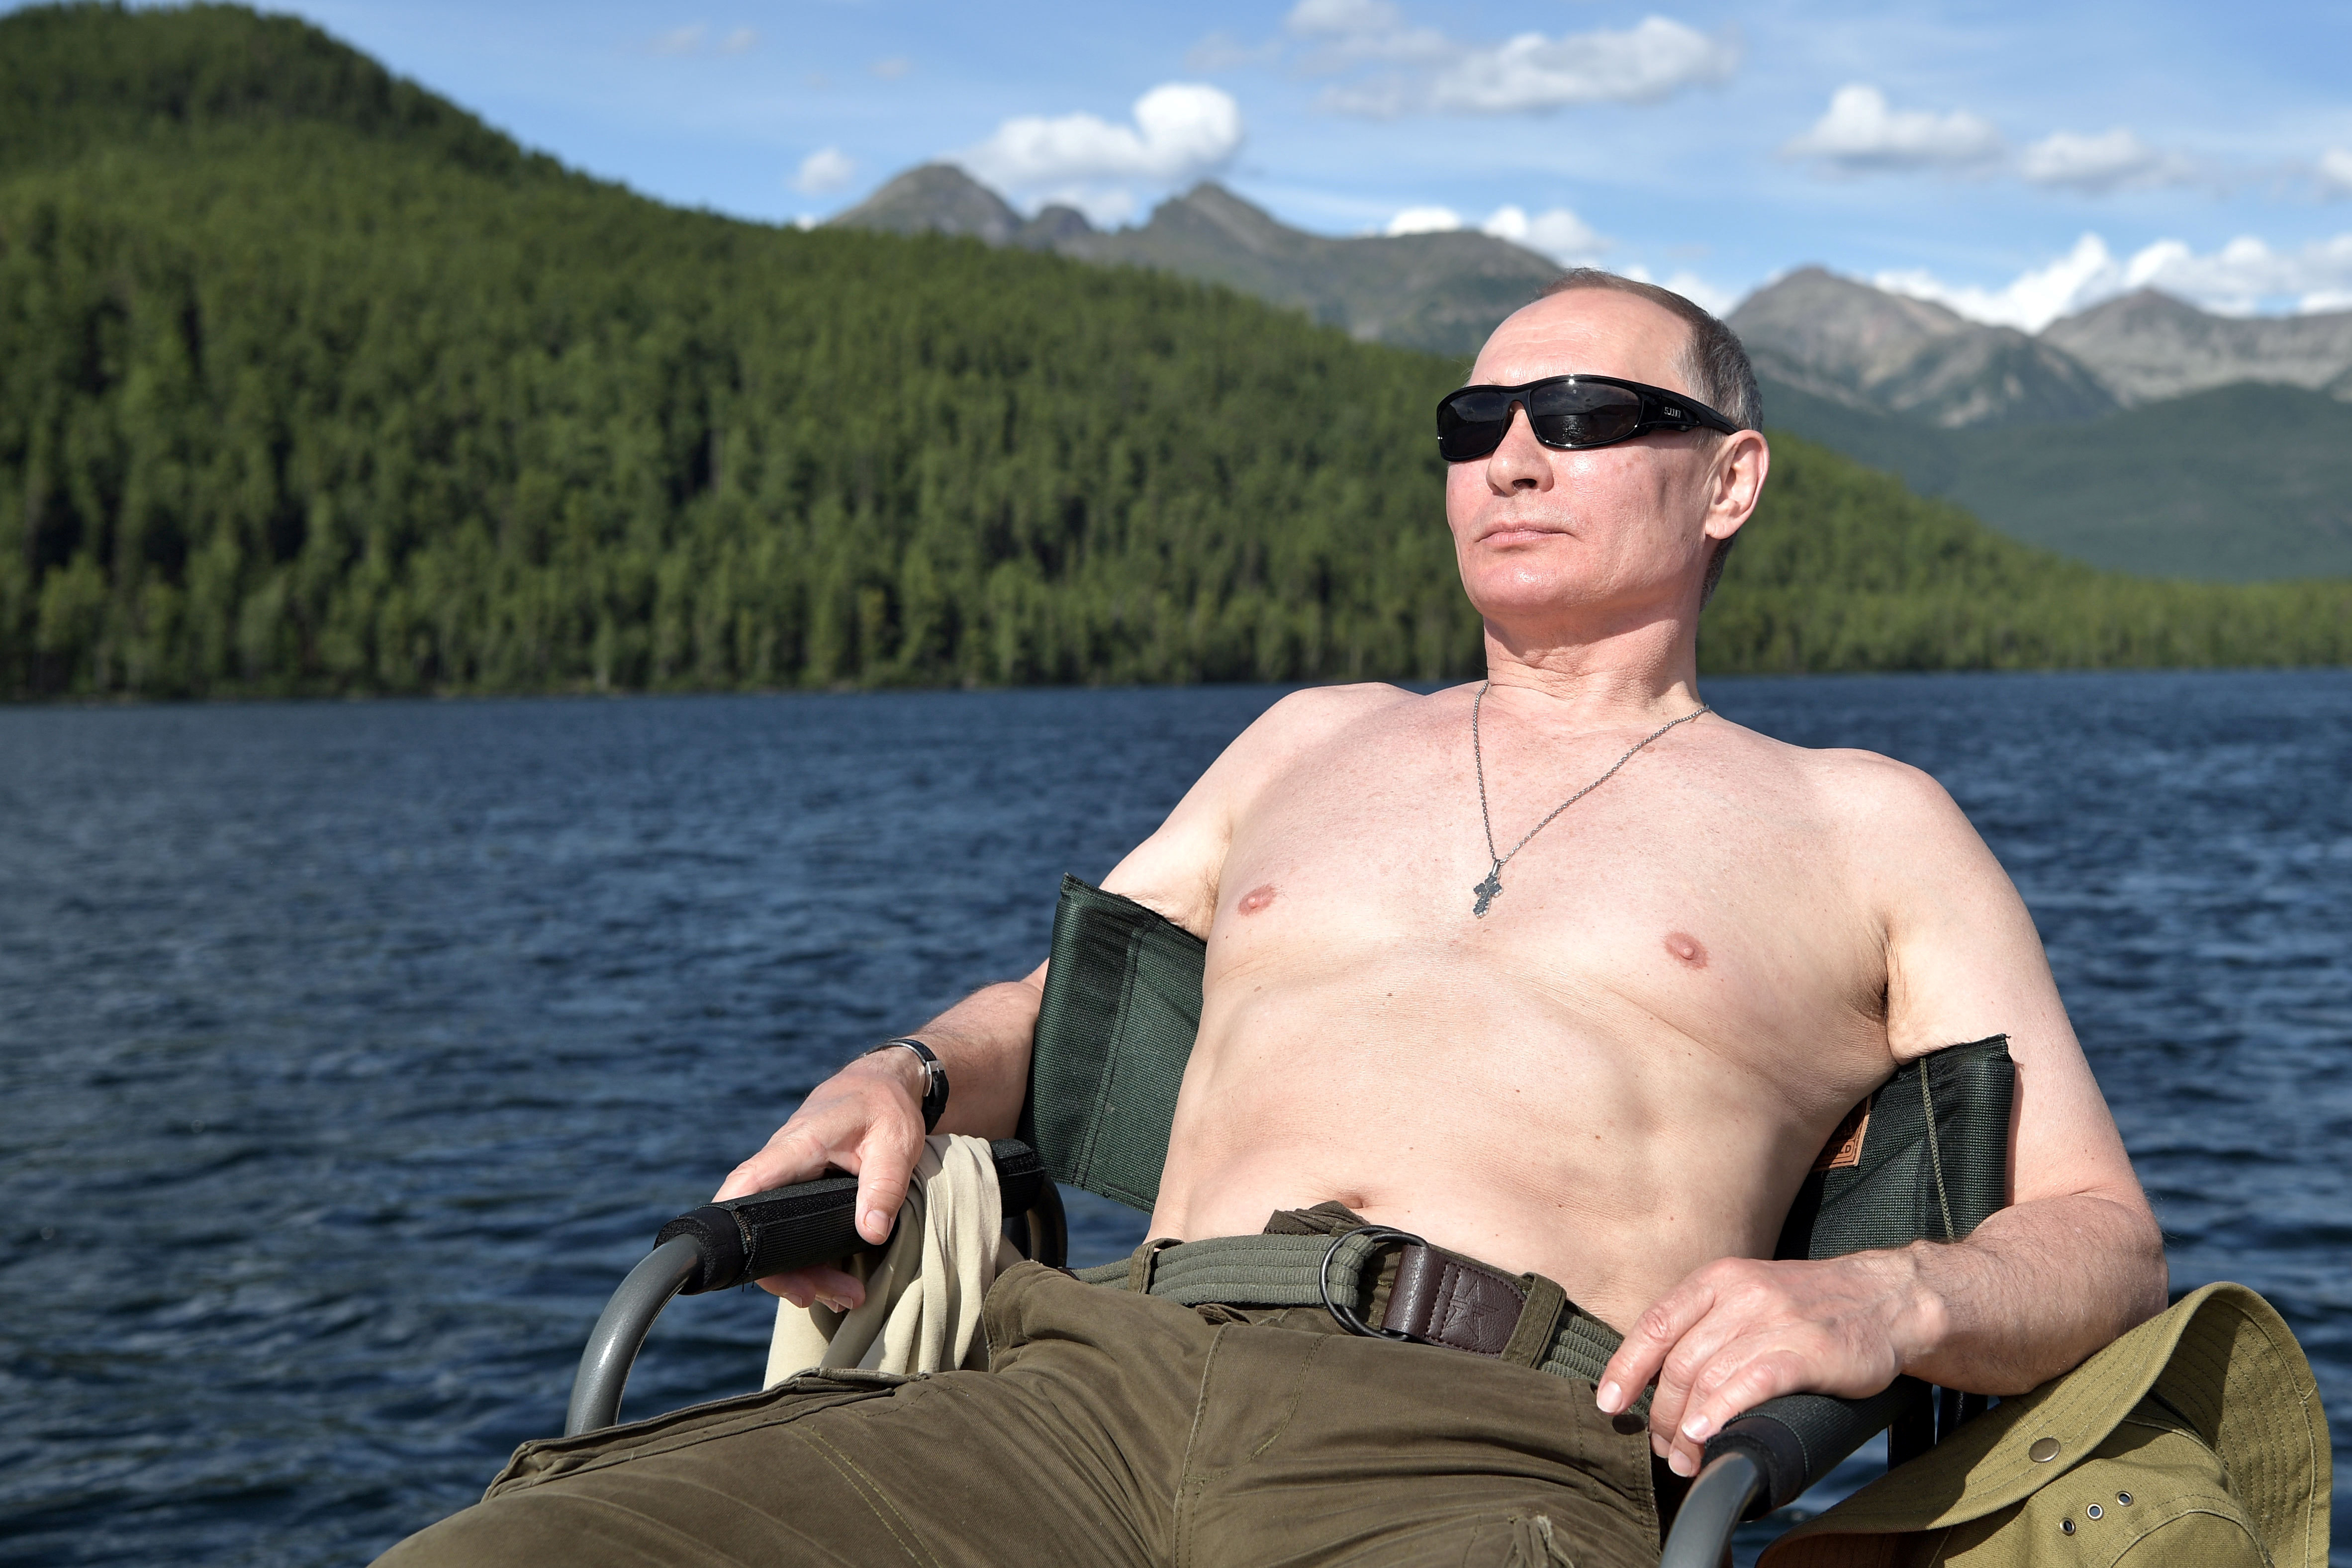 Putin relaxes after fishing during the hunting and fishing trip in 2017